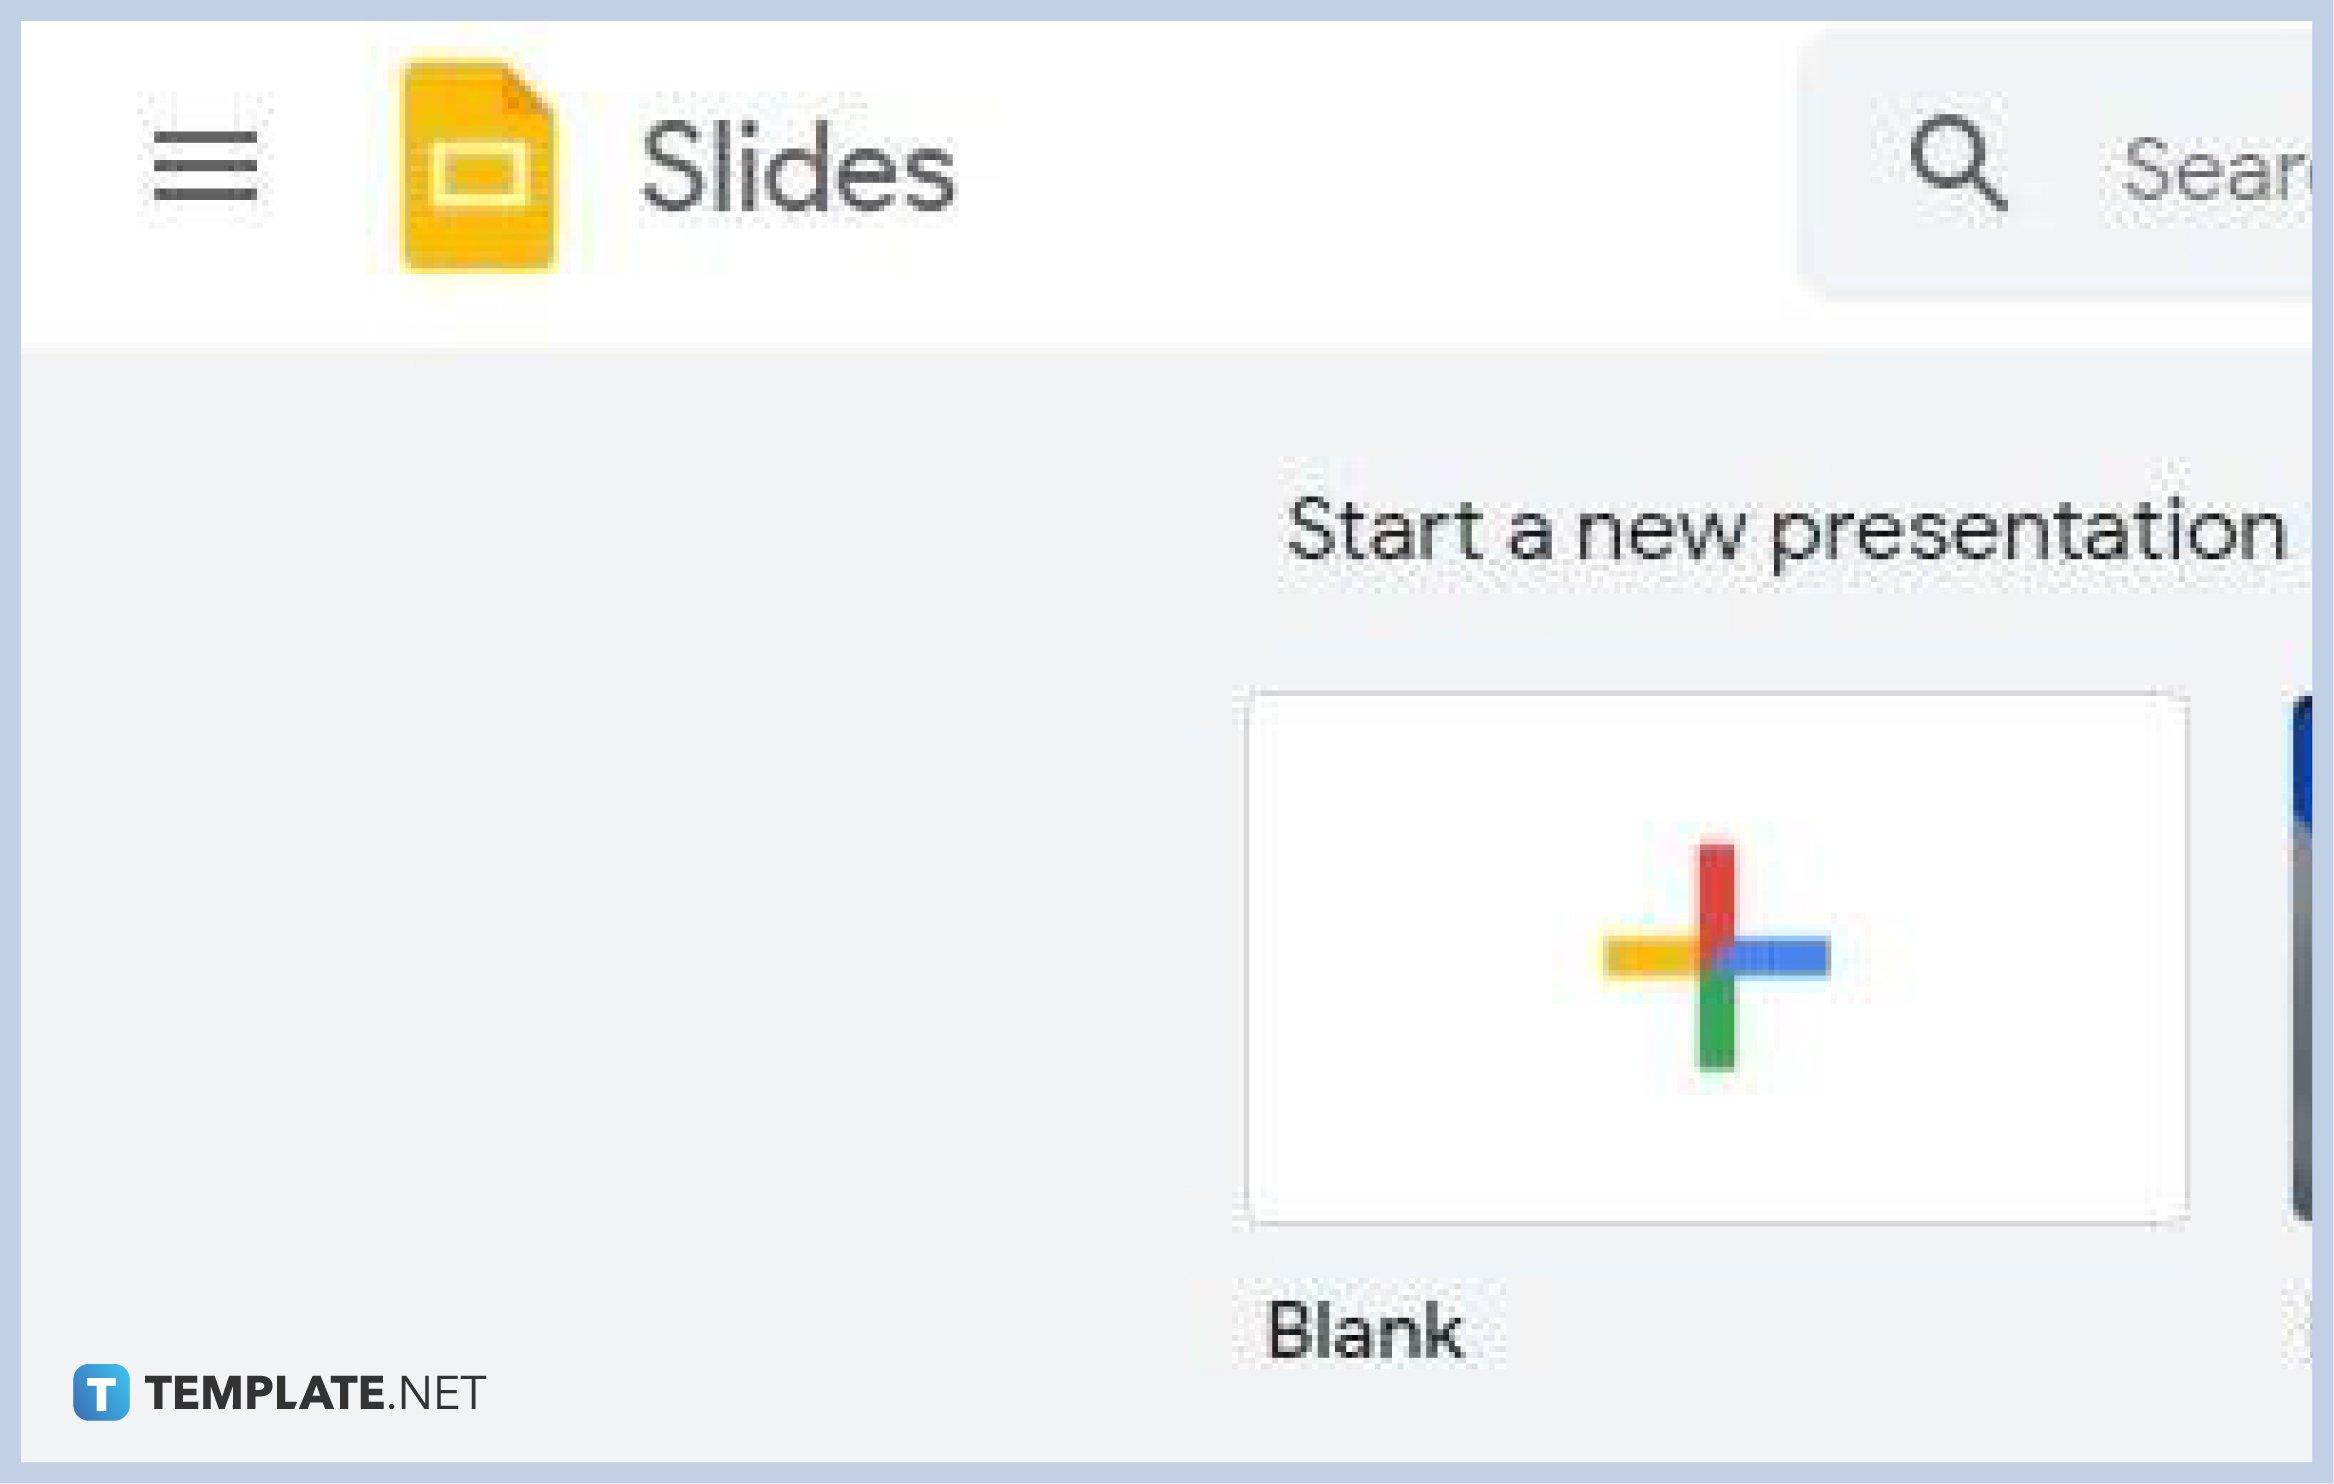 step-1-open-a-saved-presentation-in-google-slides-or-start-a-new-one-01